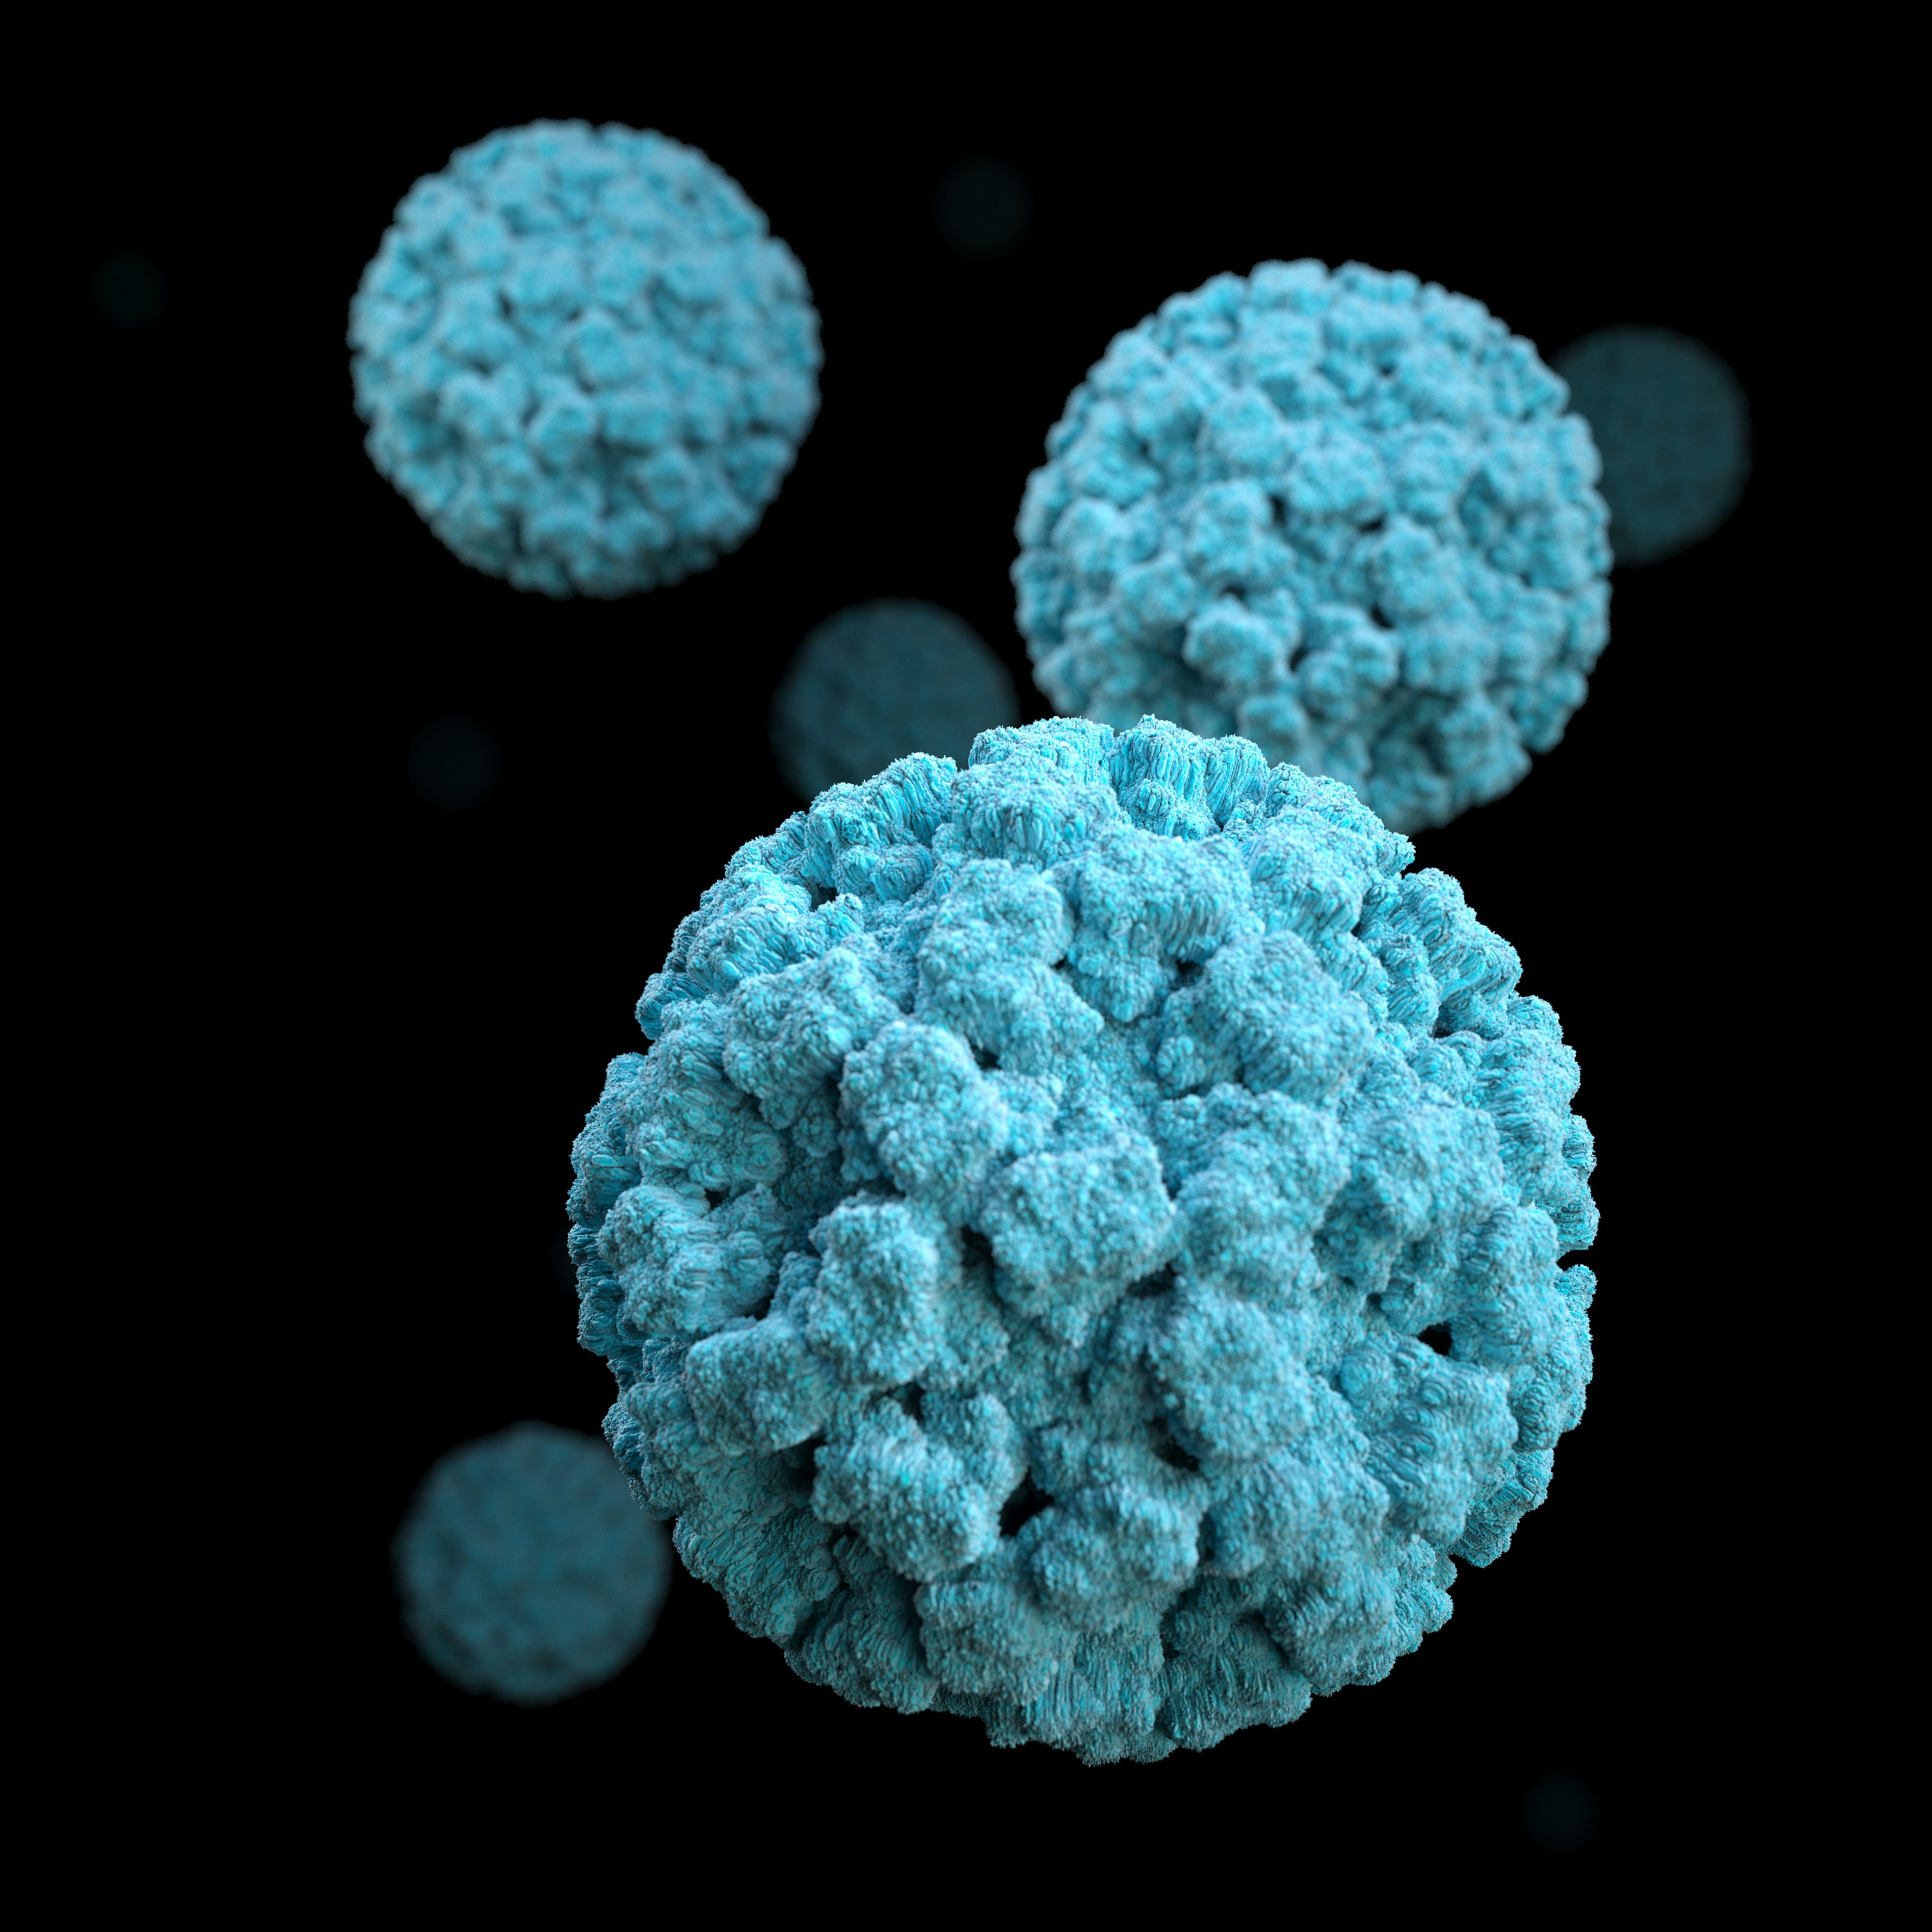 Based on electron microscopic (EM) imagery, this illustration provides a three-dimensional (3D), graphical representation of a number of norovirus virions, set against a black background. Illustrator: Alissa Eckert, MS